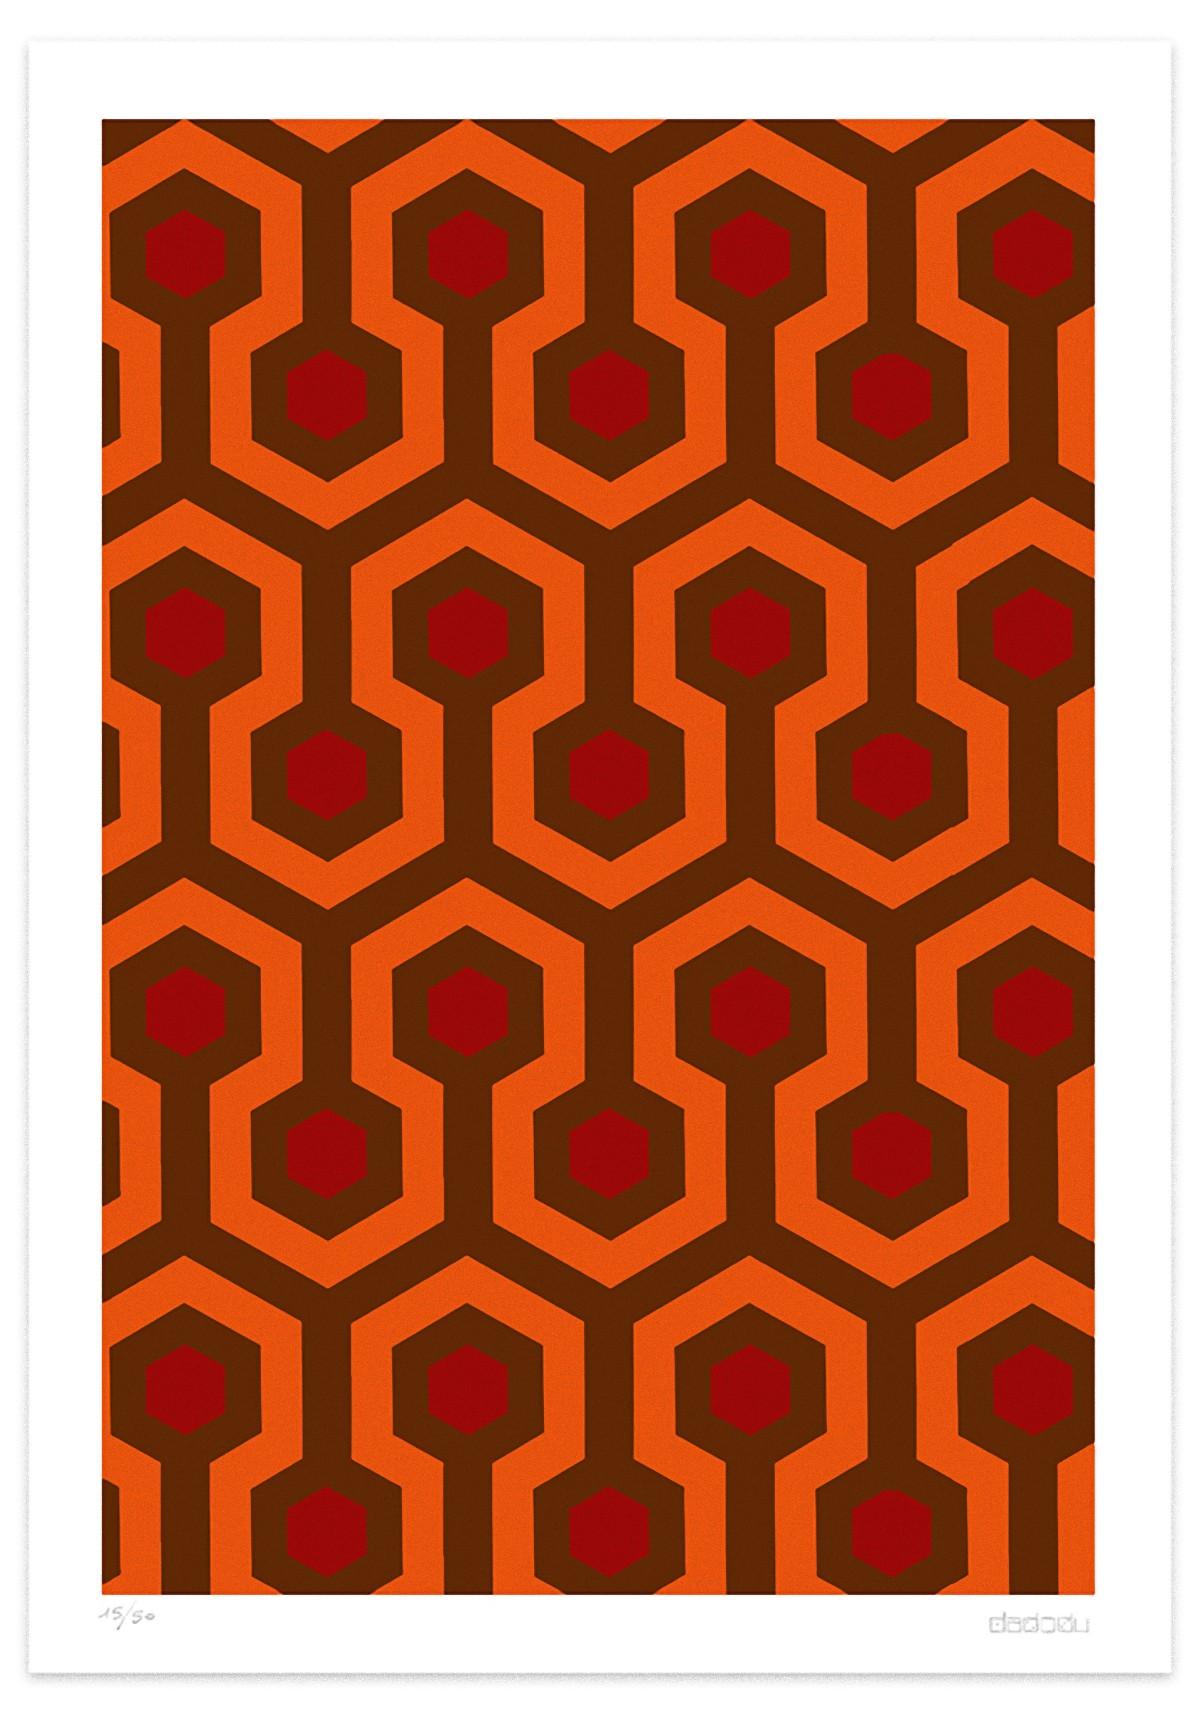 The Shining  is an interesting  giclée print realized by the contemporary artist Dadodu  in 2016.

This original artwork represents the famous geometrical pattern of the carpet in the film The Shining , directed by Stanley Kubrick .

Hand-signed on